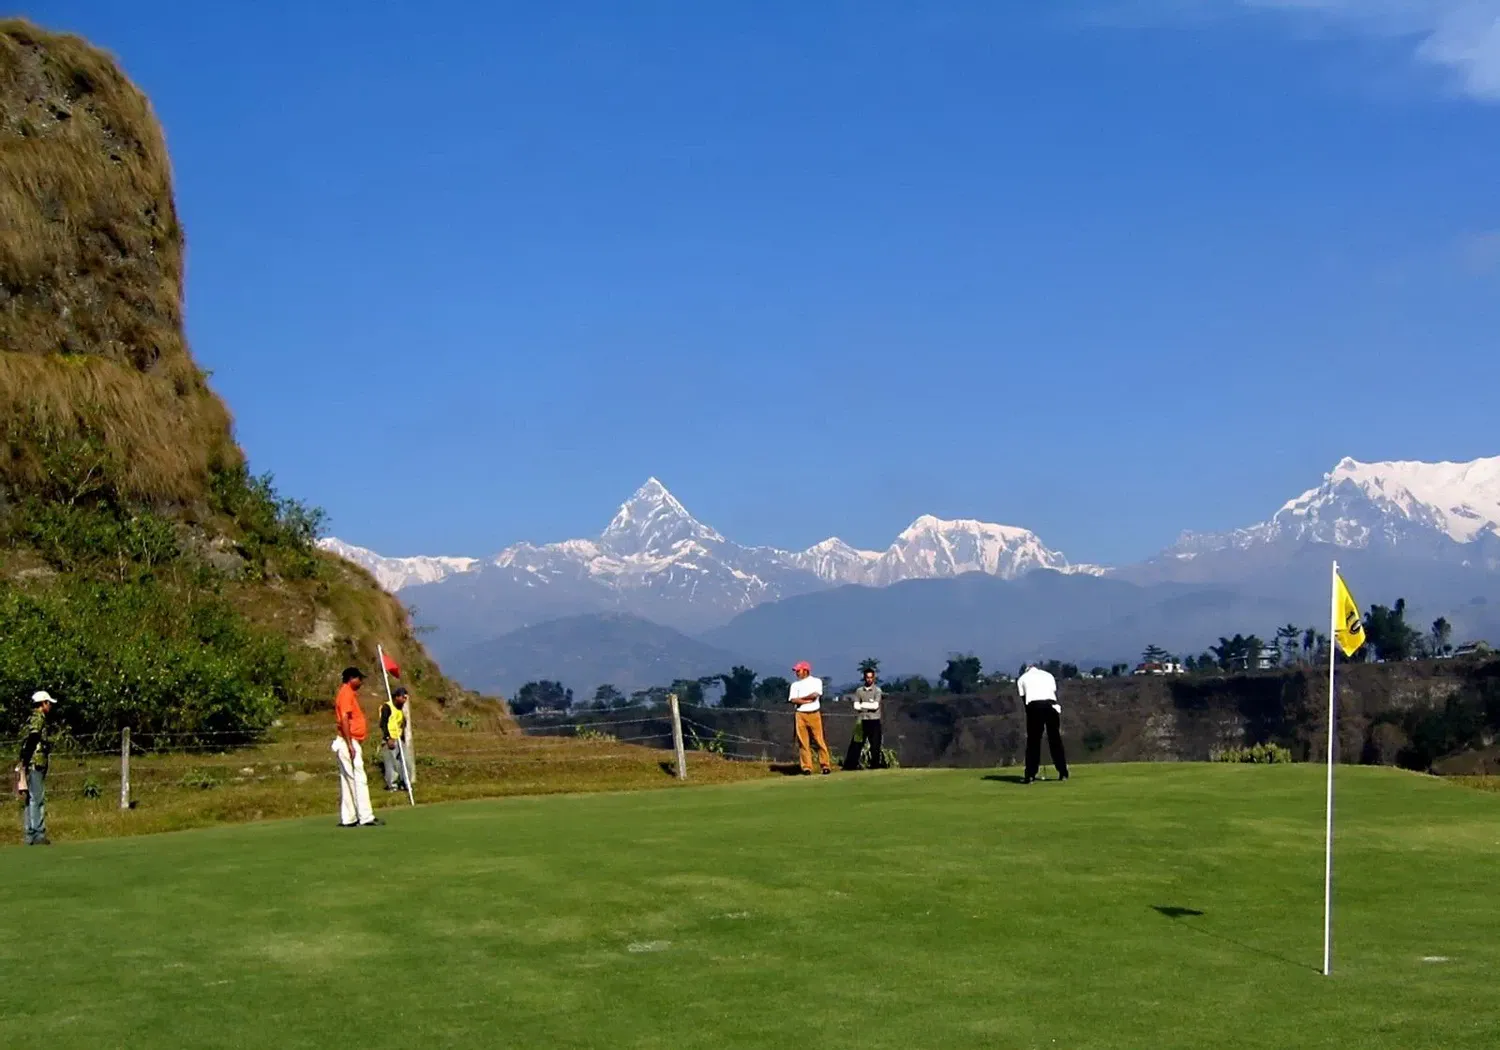 Golf course with the snow-capped Himalayas